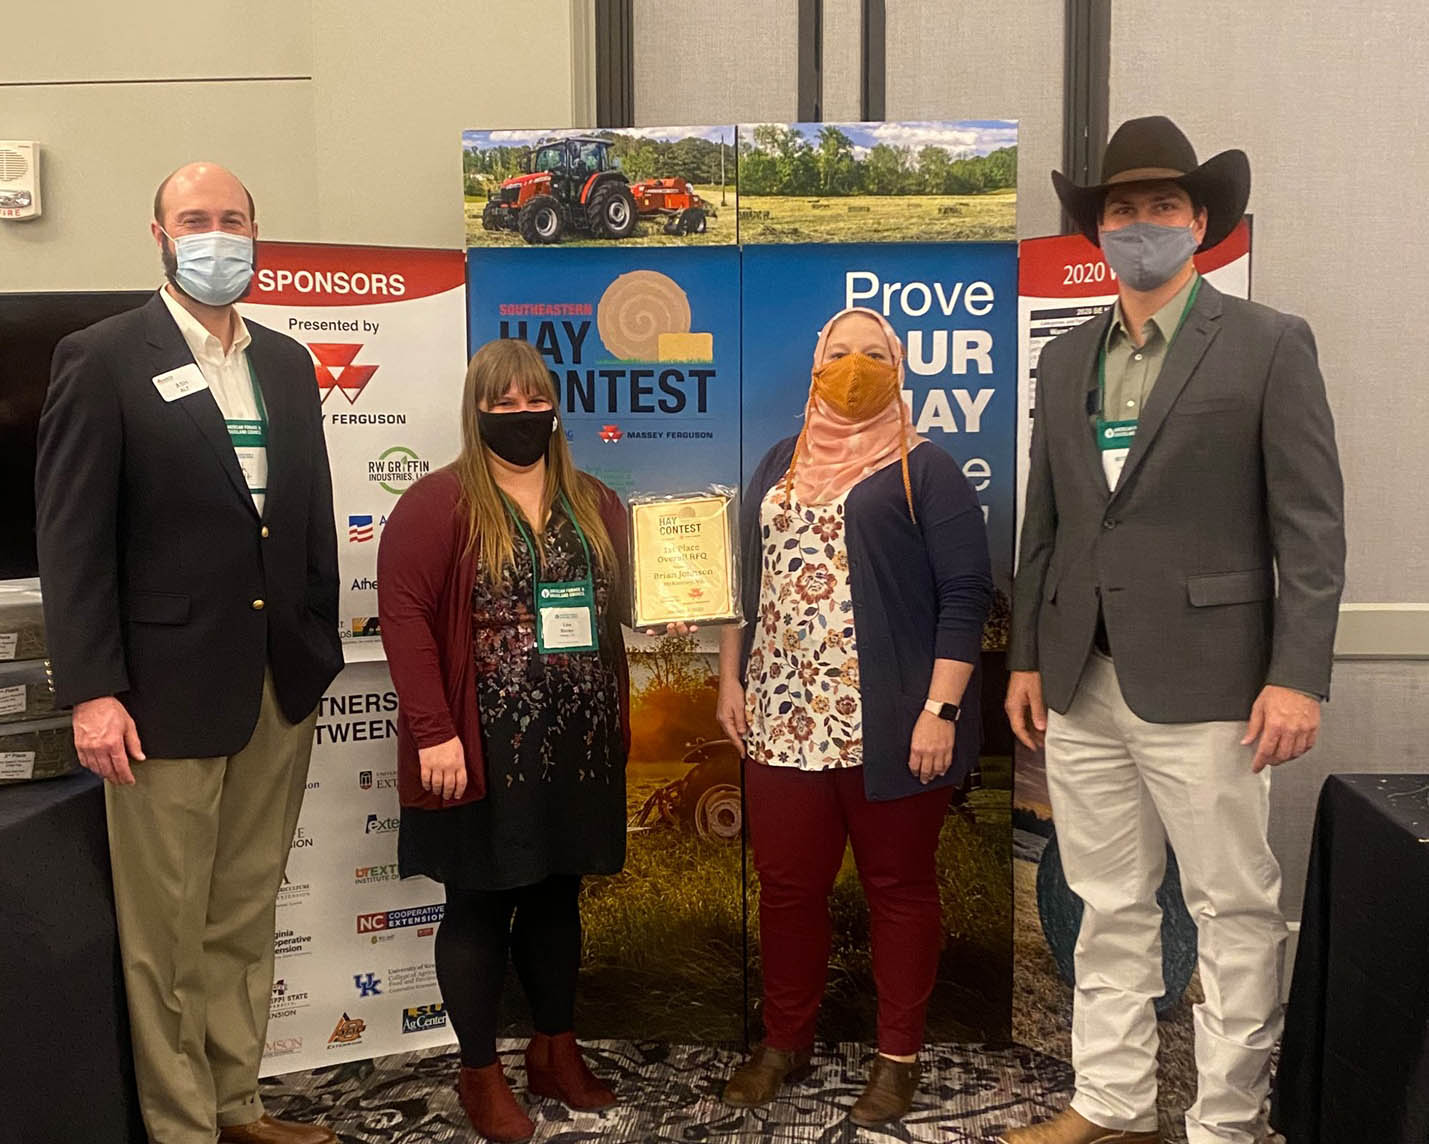 The 2020 Southeastern Hay Contest grand prize was awarded to Brian Johnson of McKenney, Virginia, for his alfalfa hay sample (not pictured). Pictured from left to right are Ash Alt, Massey Ferguson Field Execution Manager; Lisa Baxter, UGA Forage Extension Specialist; Leanne Dillard, Auburn University Forage Extension Specialist; and Marcelo Wallau, UF Forage Extension Specialist.